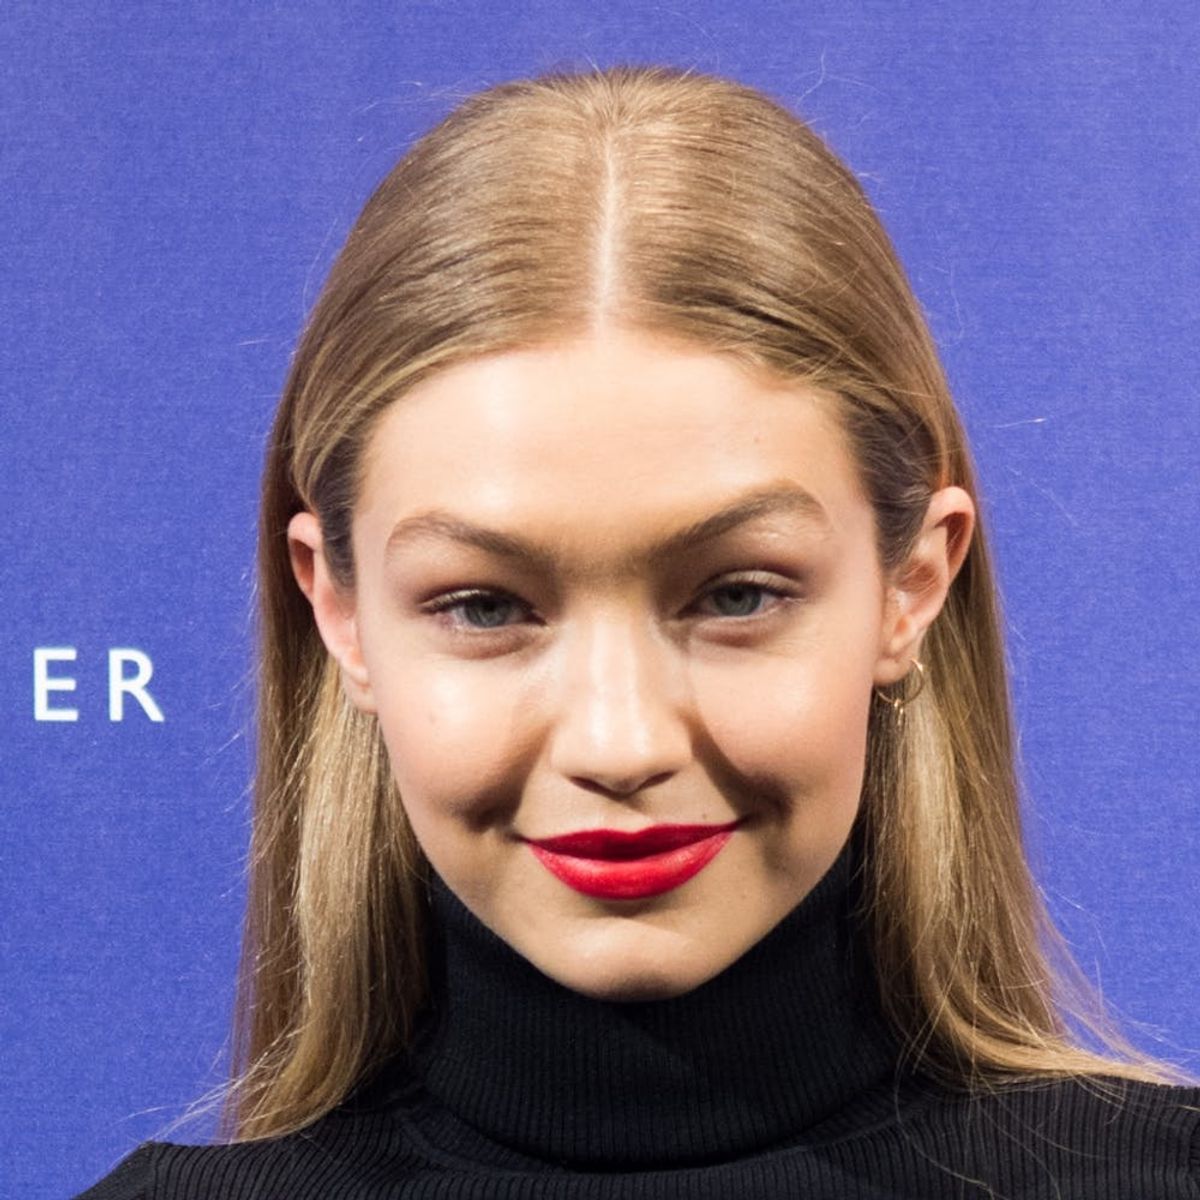 The Wait Is Over: Gigi Hadid’s Maybelline Collection Is Finally Here